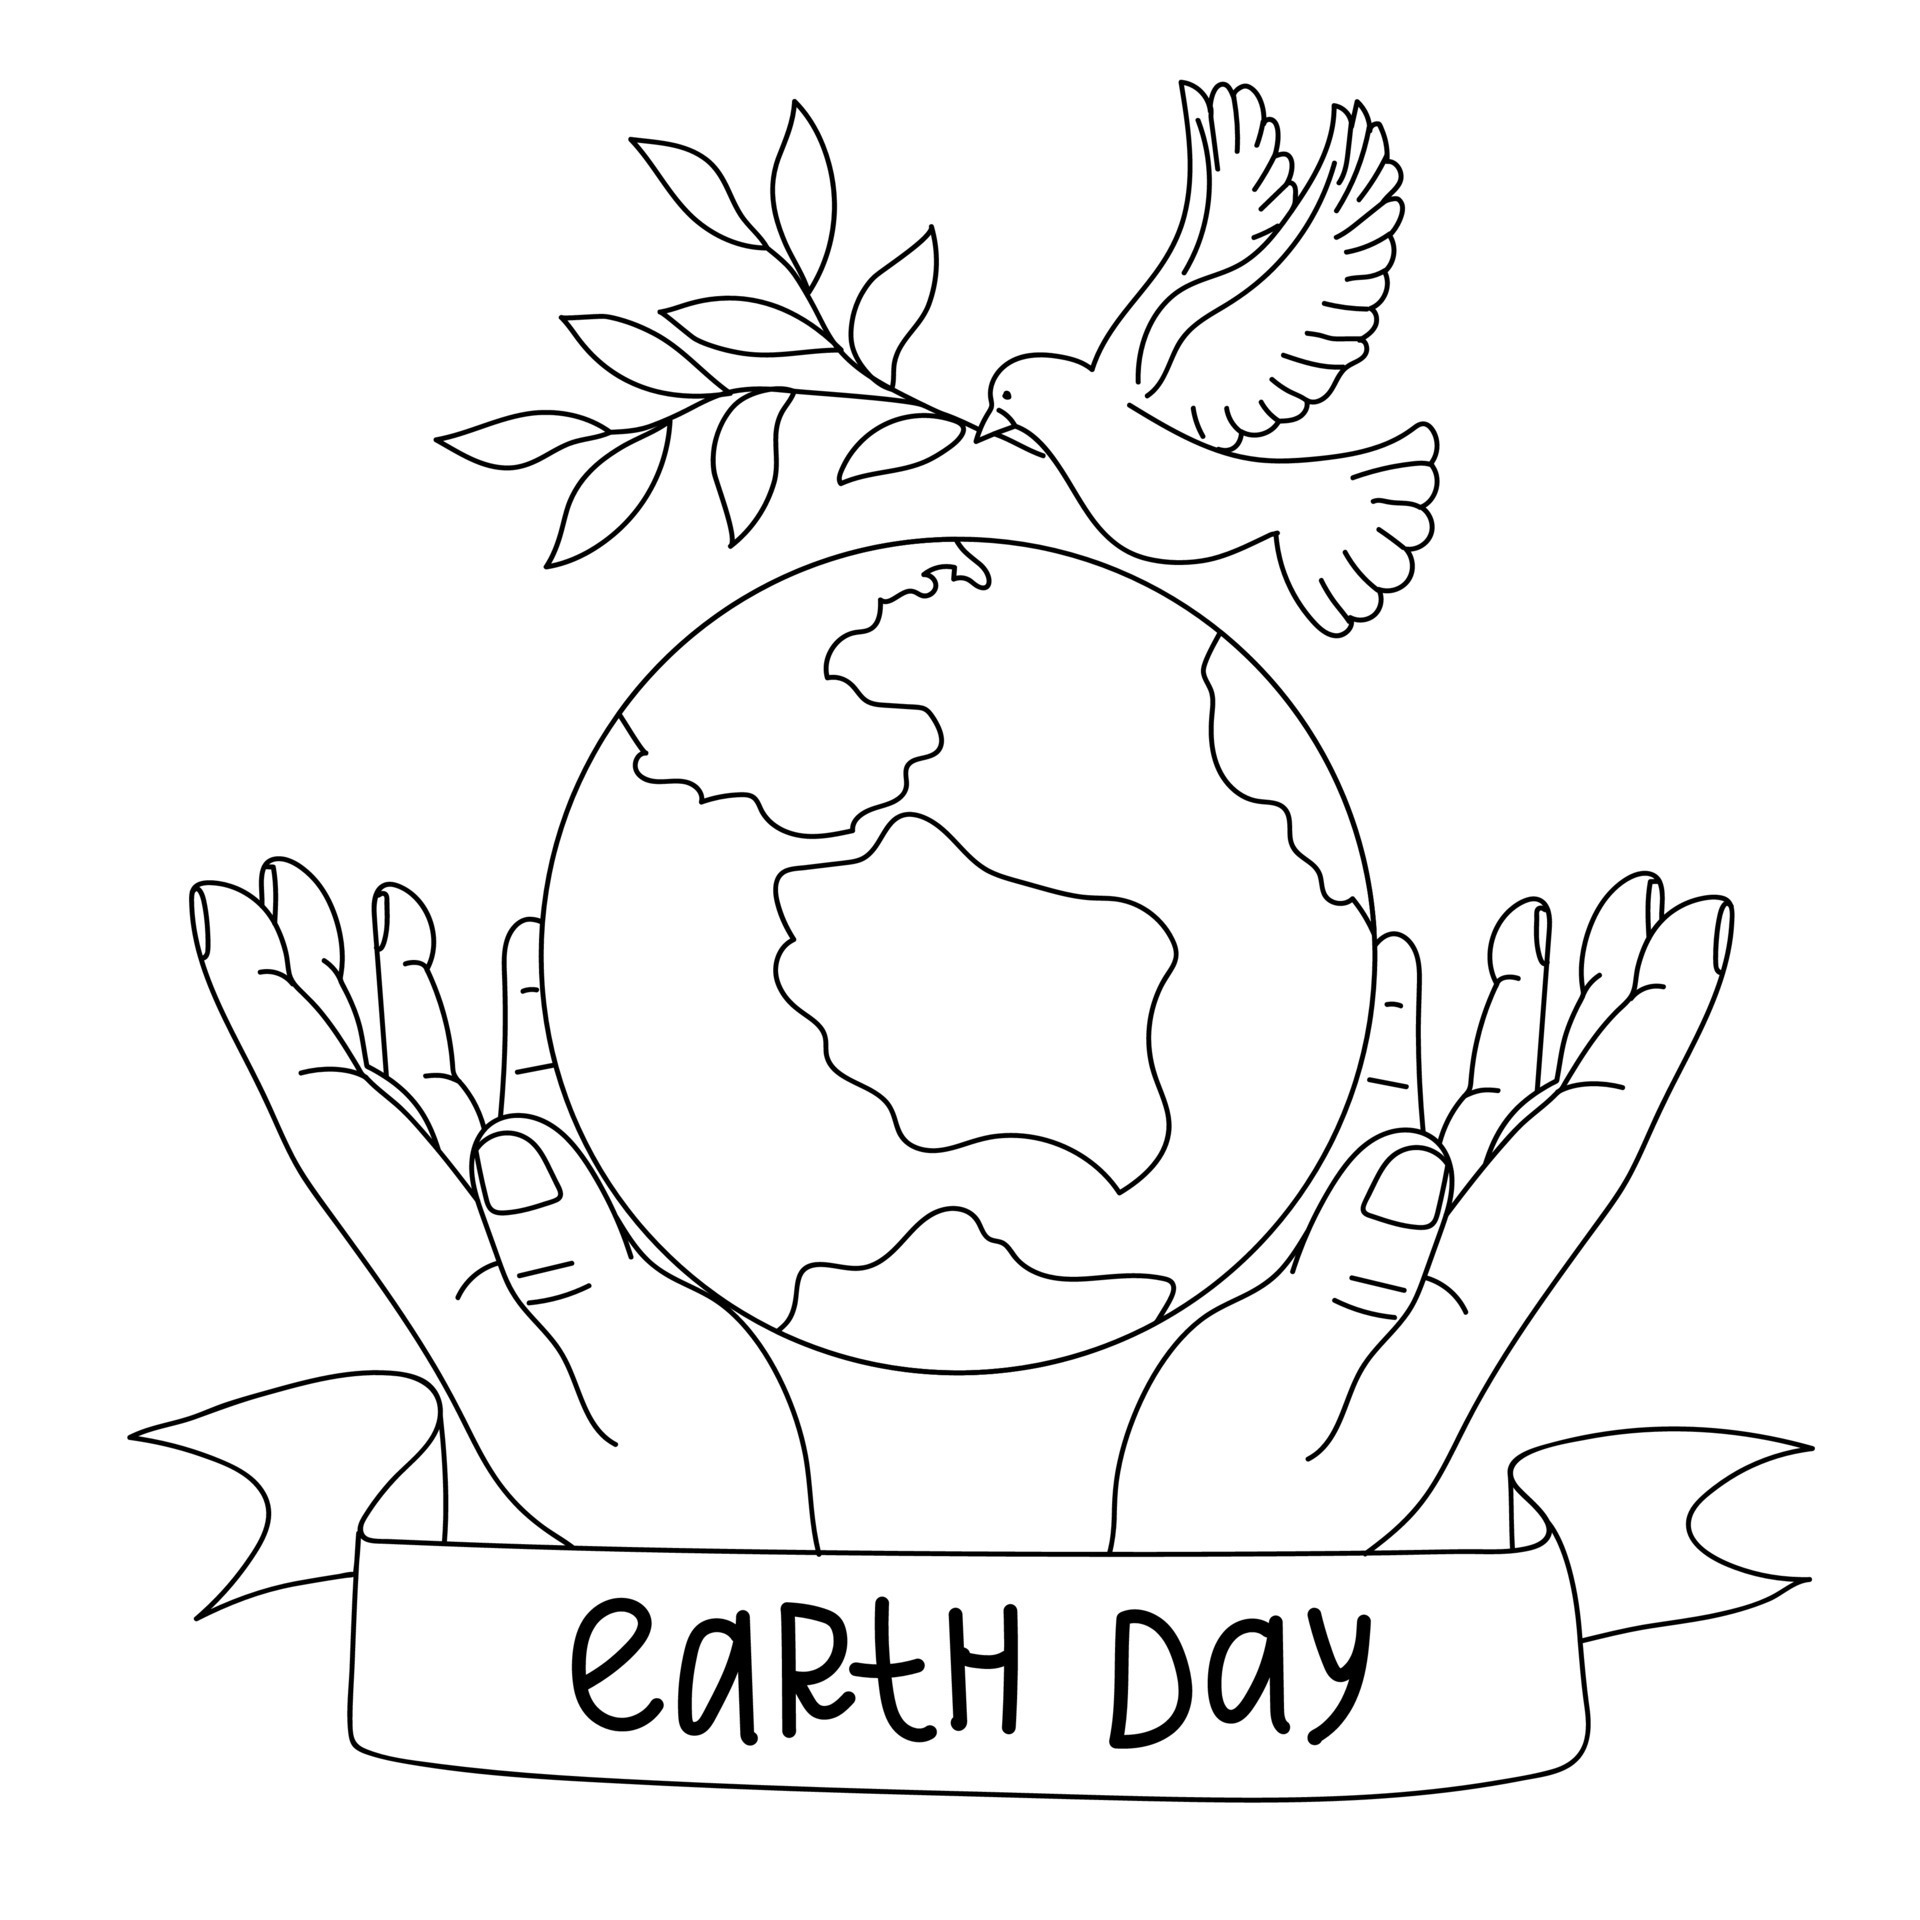 Hand draw earth day Royalty Free Vector Image - VectorStock-saigonsouth.com.vn